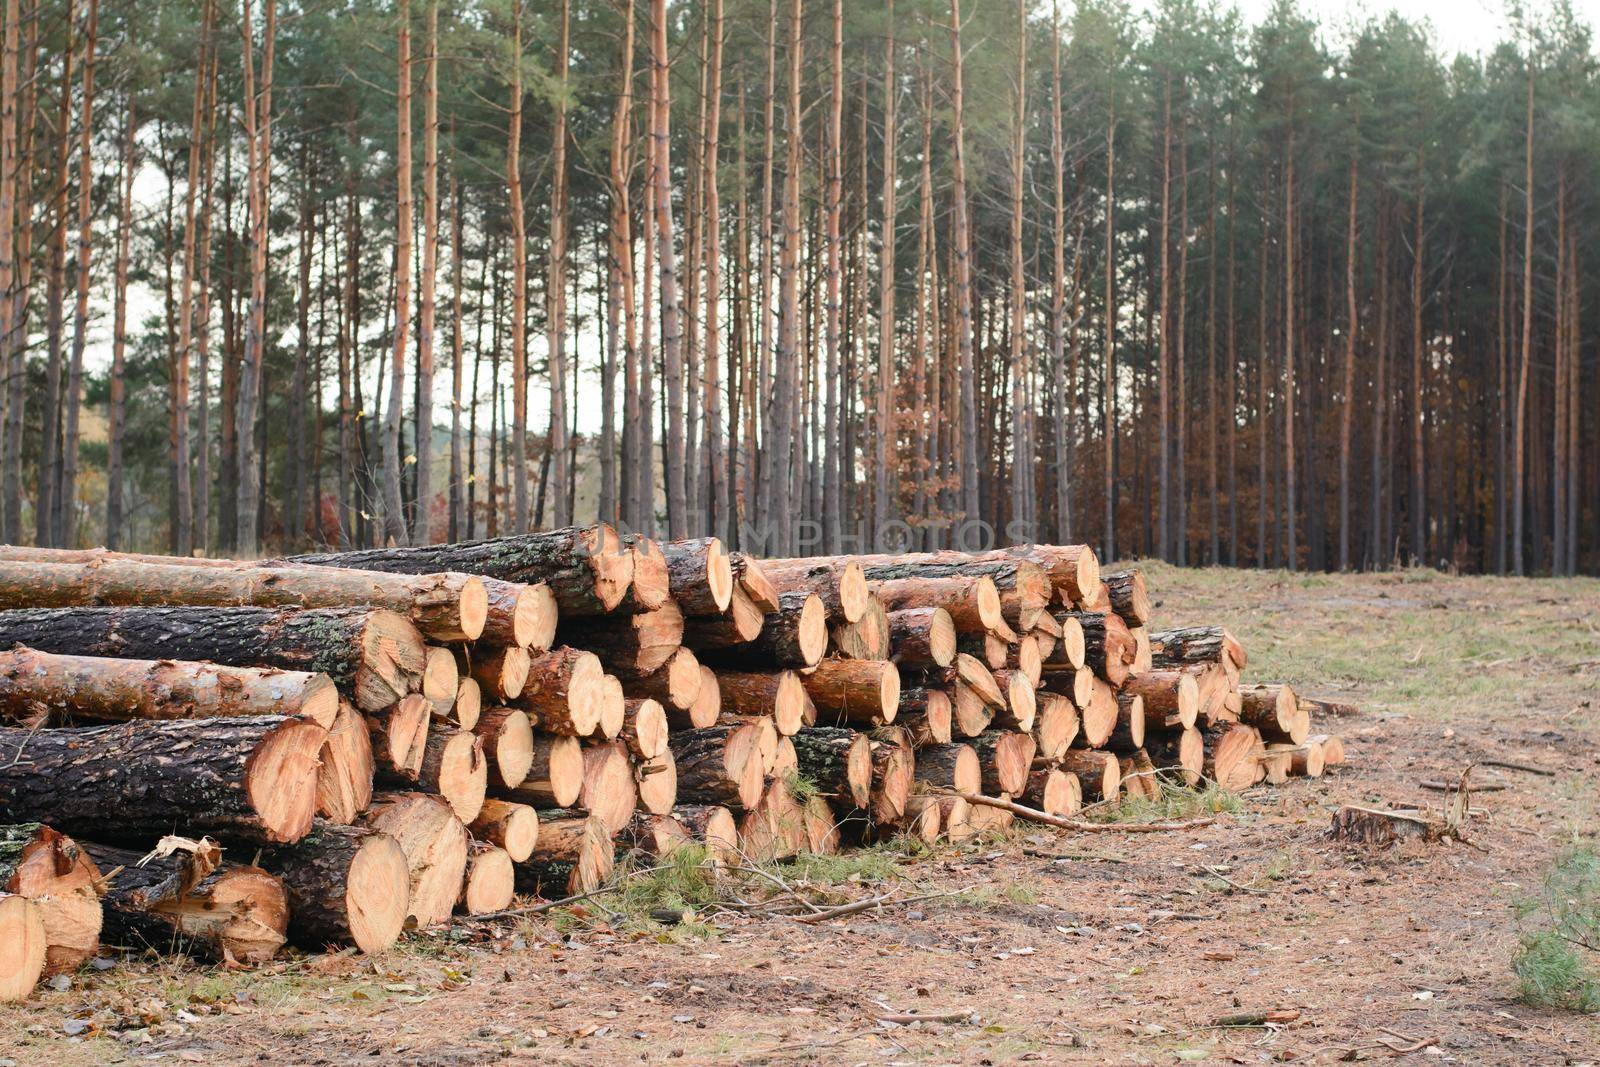 Woodpile of freshly harvested pine logs lays near the former pine forest